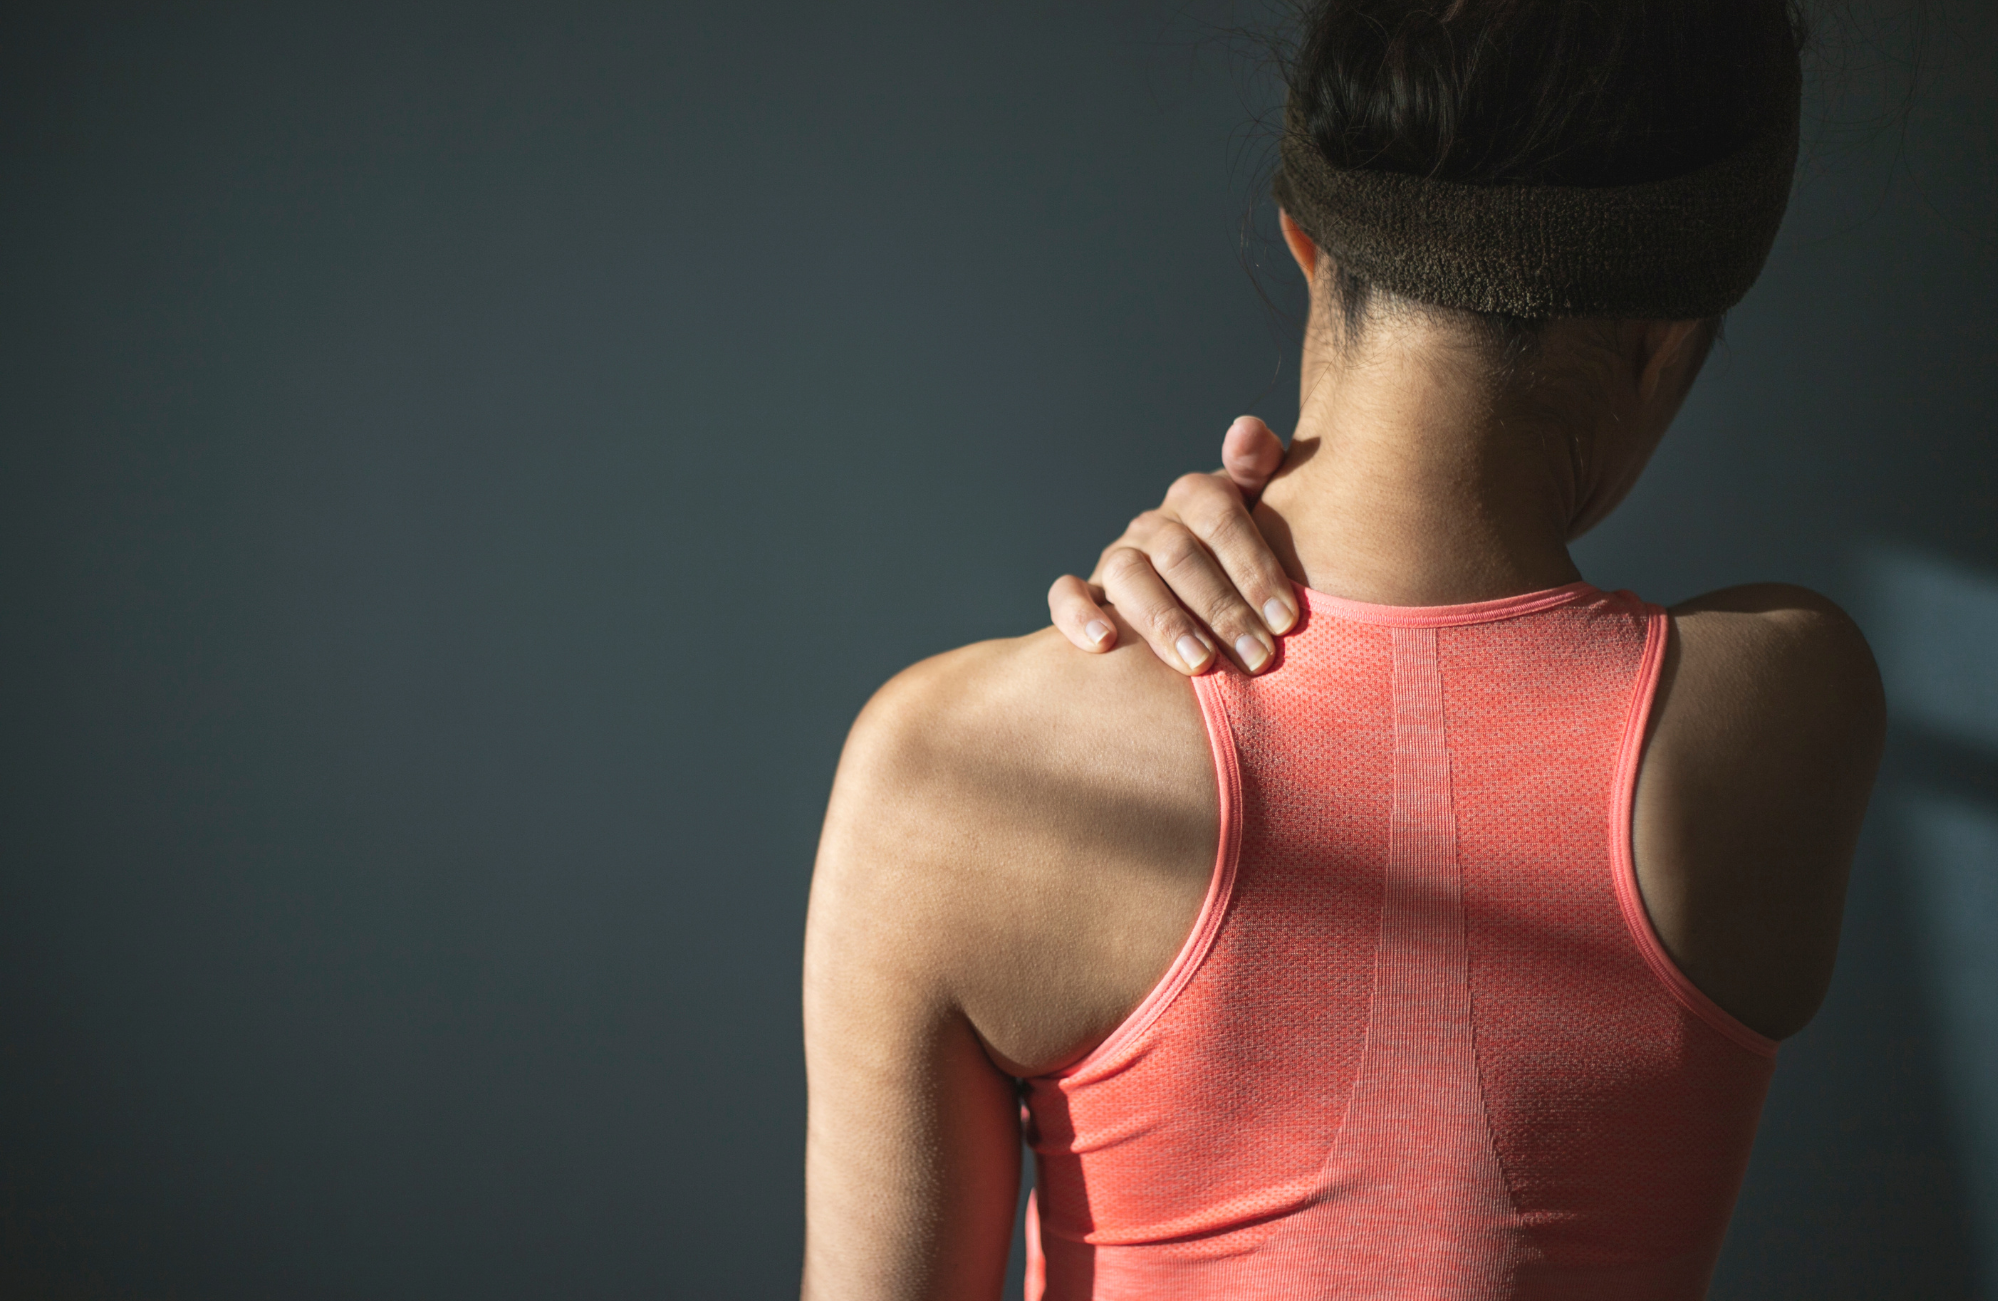 The Best Way You Can Avoid That Nagging Rotator Cuff Injury